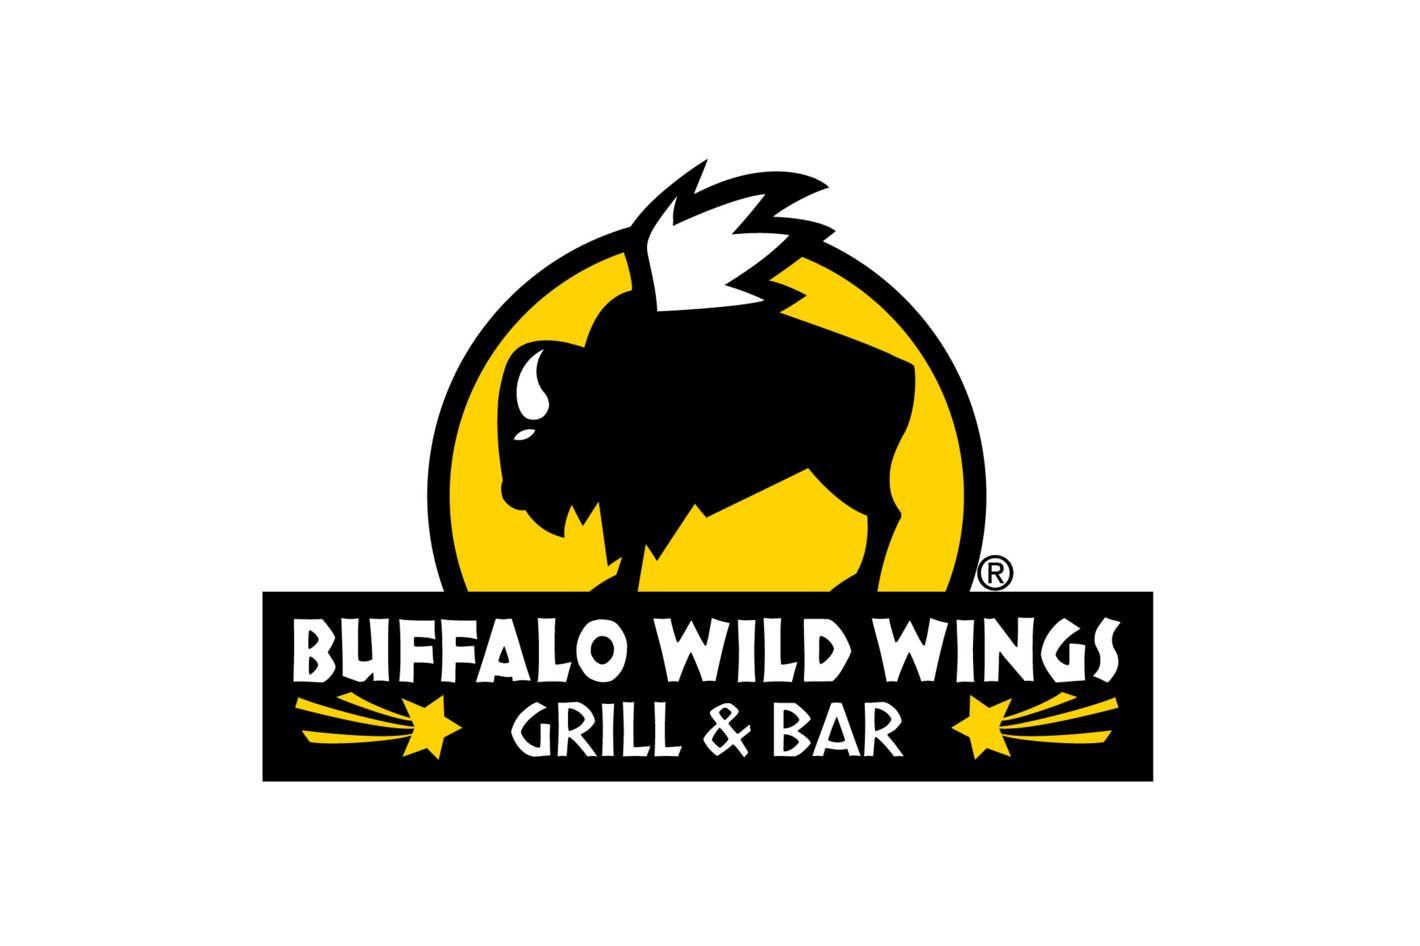 Buffalo Wild Wings Logo - Dine And Dash At Buffalo Wild Wings Leads To High Speed Chase